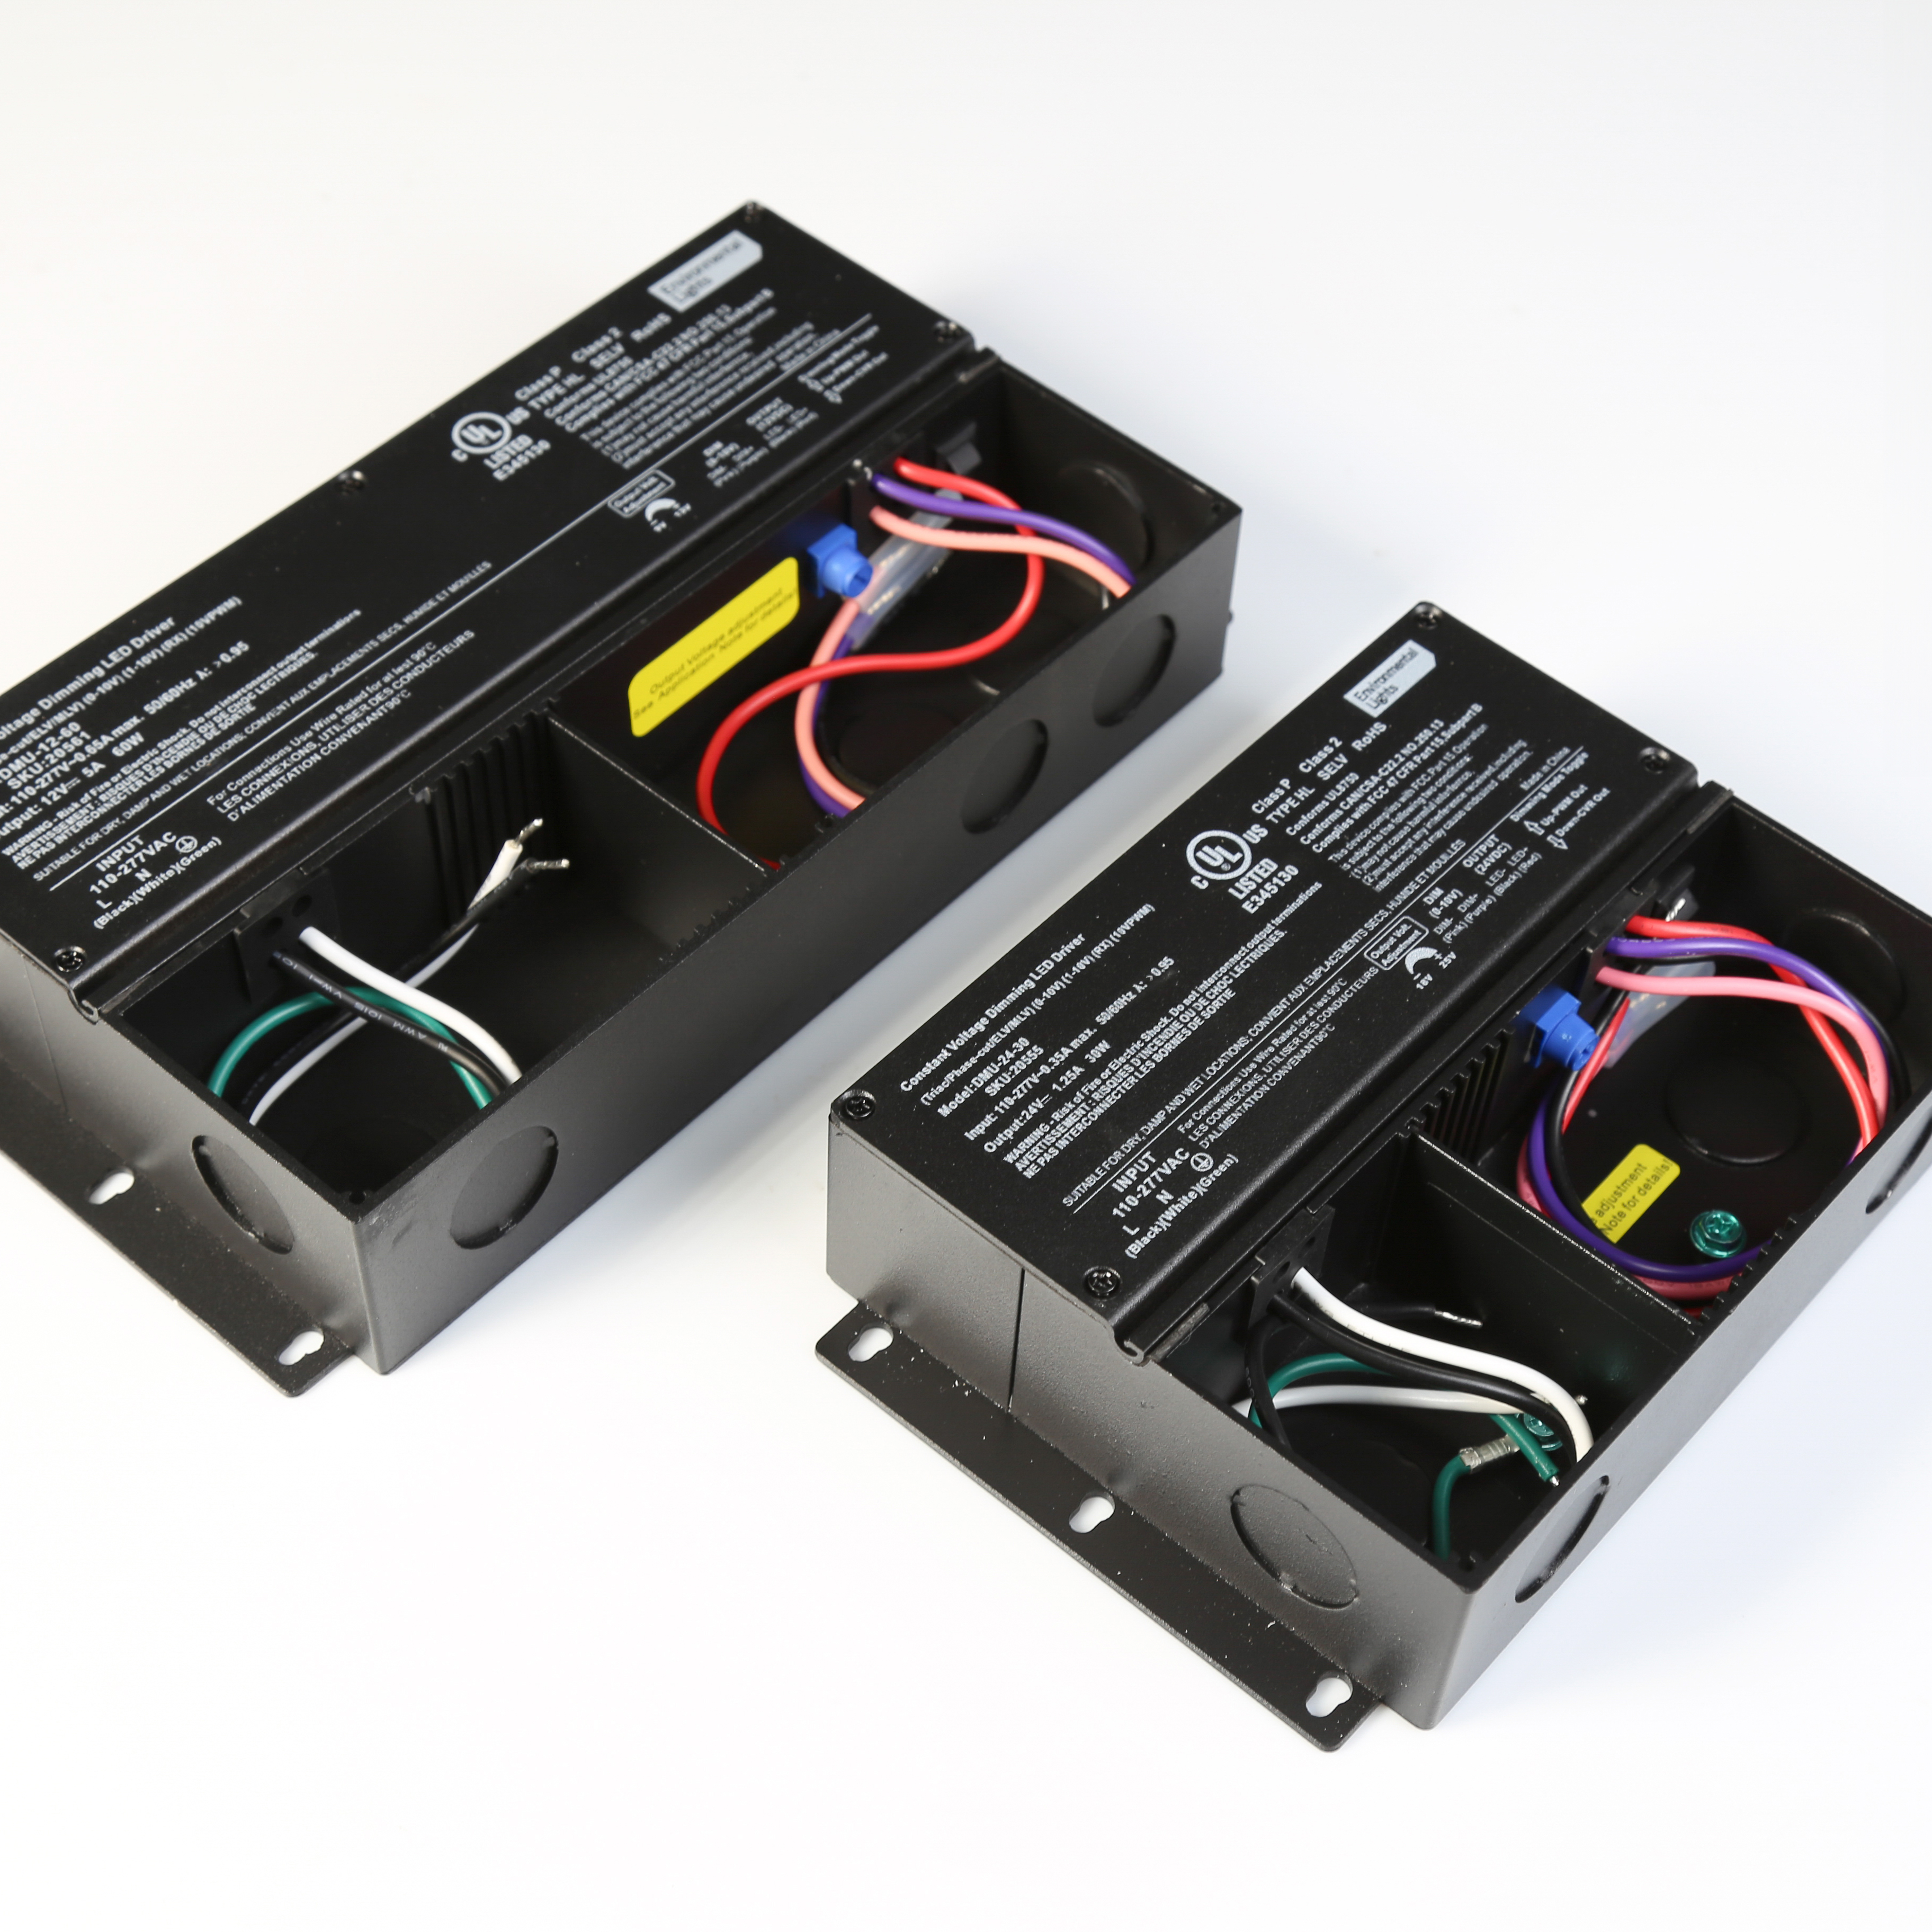 Environmental Lights Announces the Launch of Dual-Mode Universal Dimming Drivers